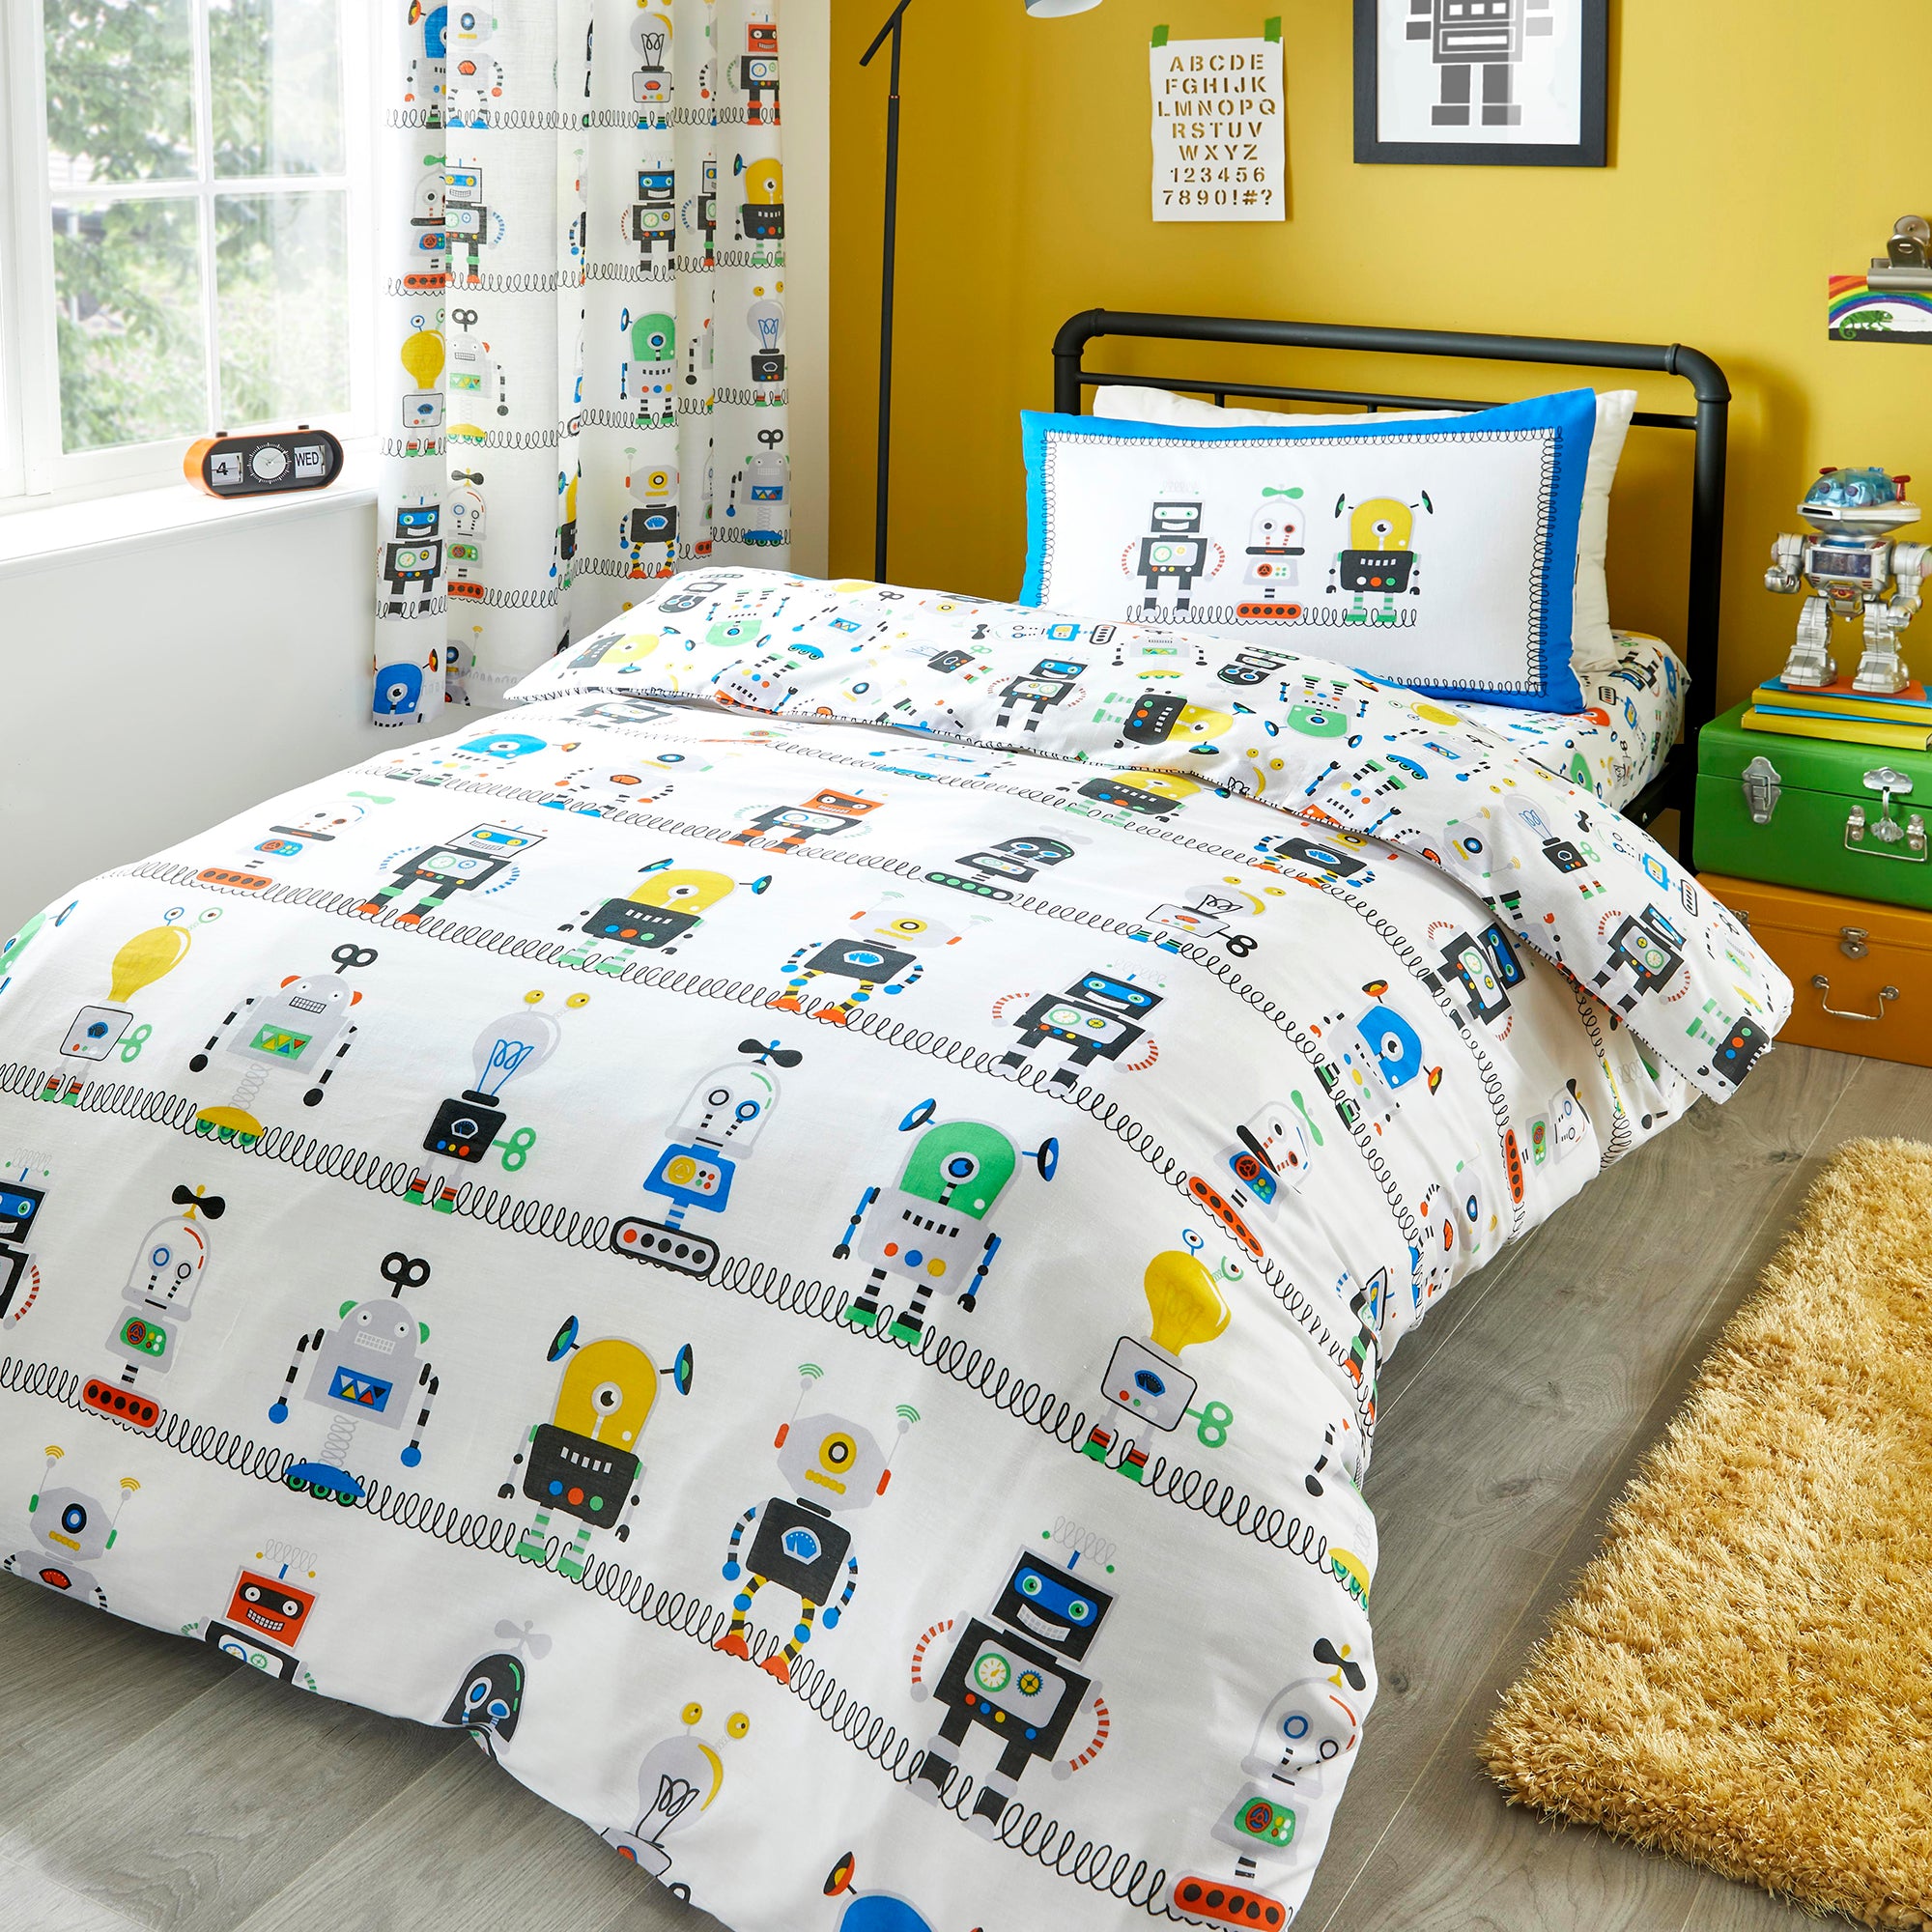 Robots - Kids Duvet Cover Set, Curtains & Fitted Sheets in Blue - by Bedlam